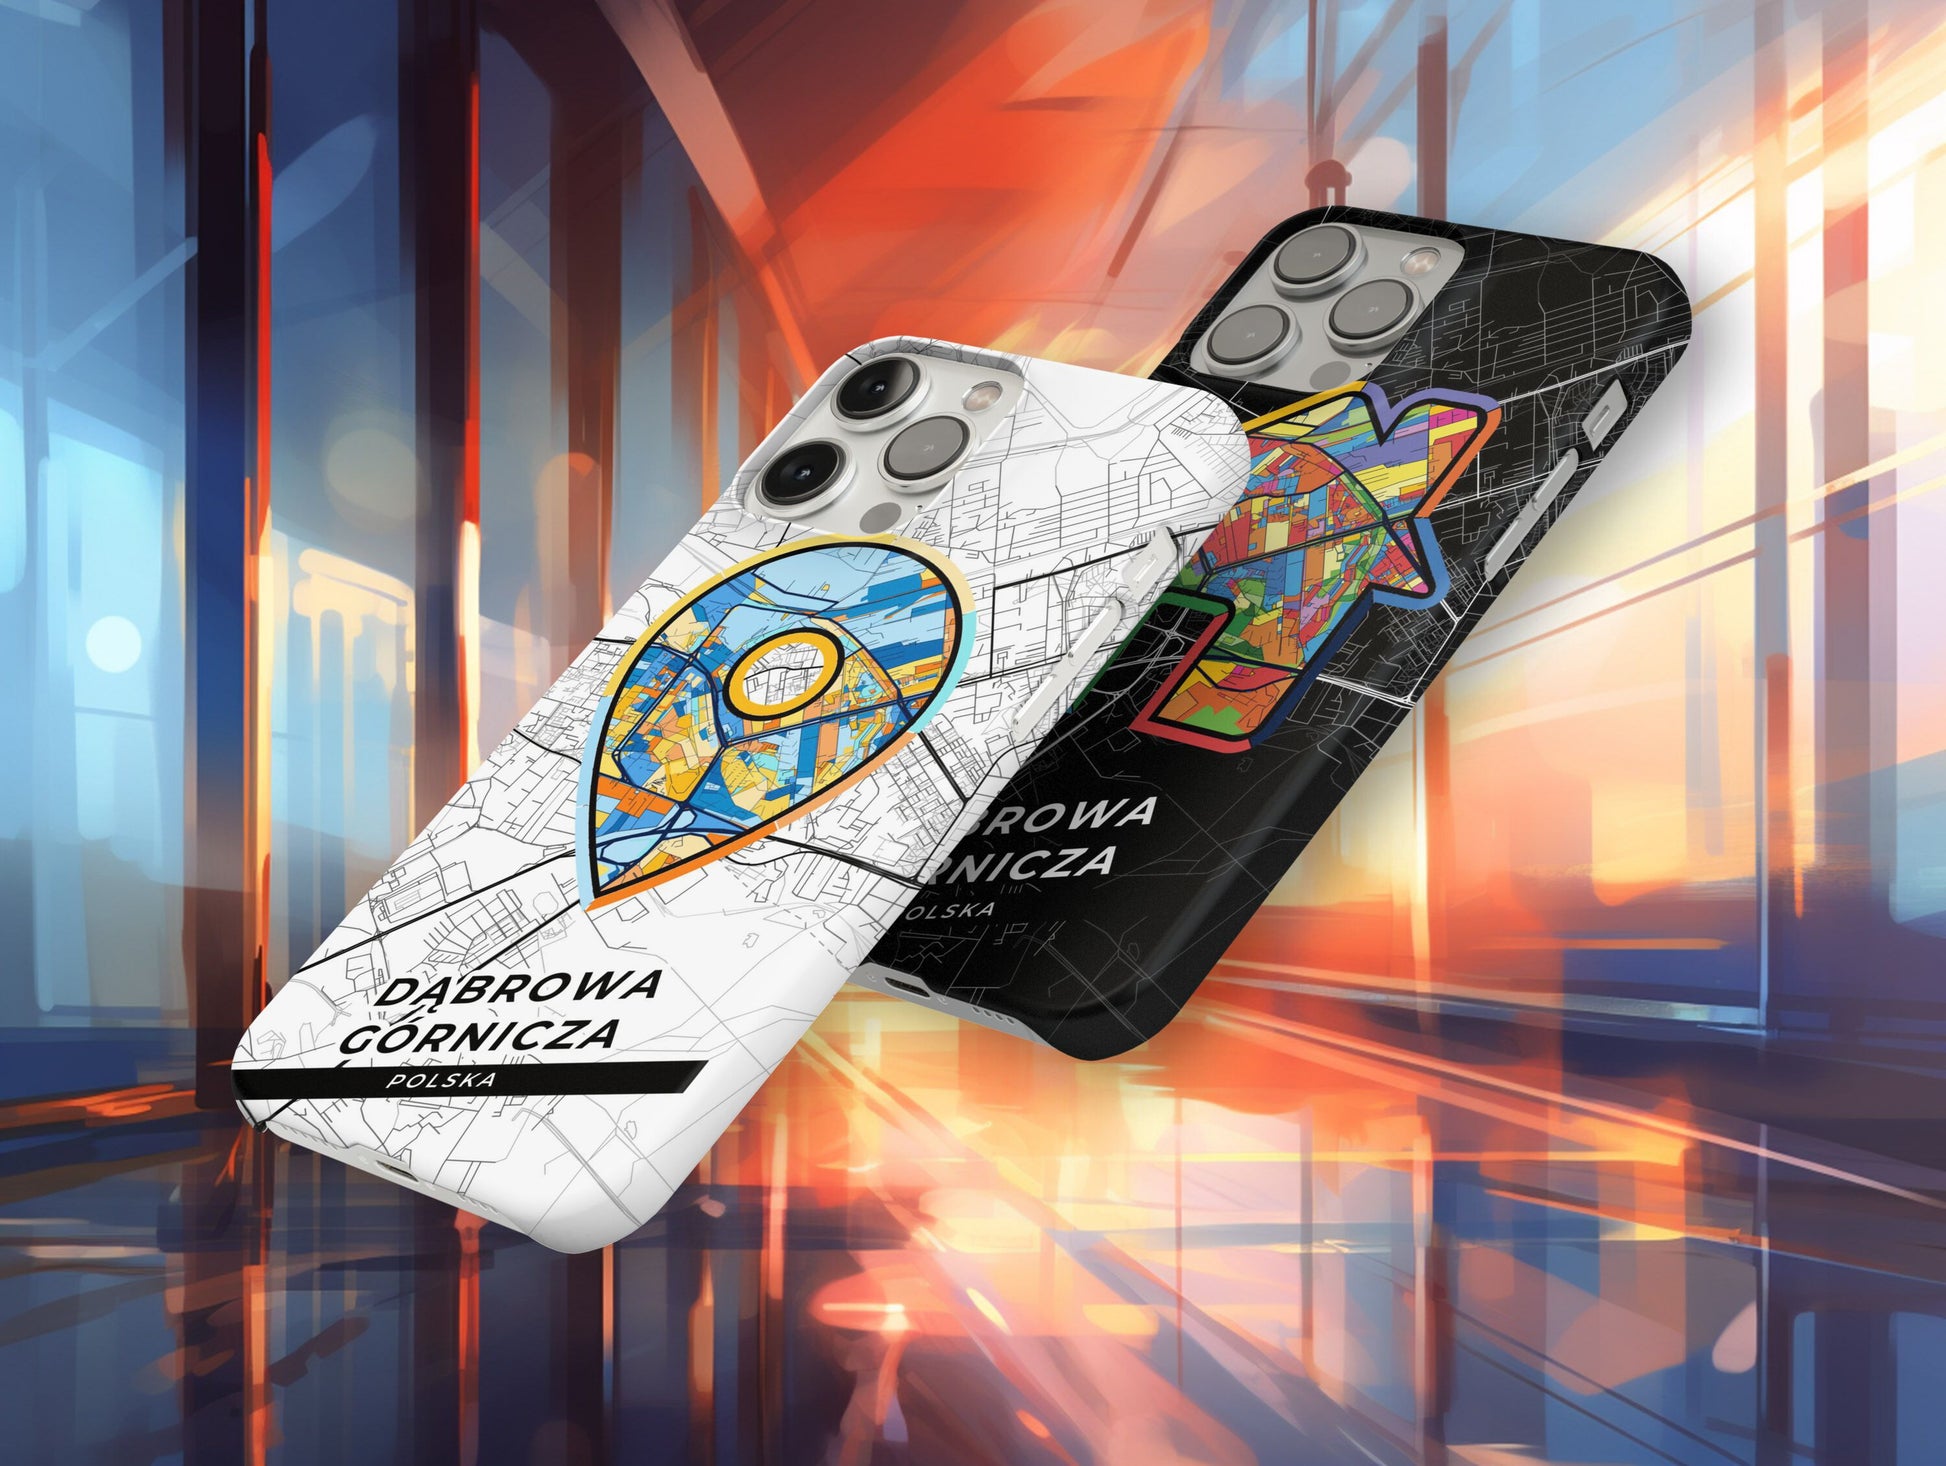 Dąbrowa Górnicza Poland slim phone case with colorful icon. Birthday, wedding or housewarming gift. Couple match cases.